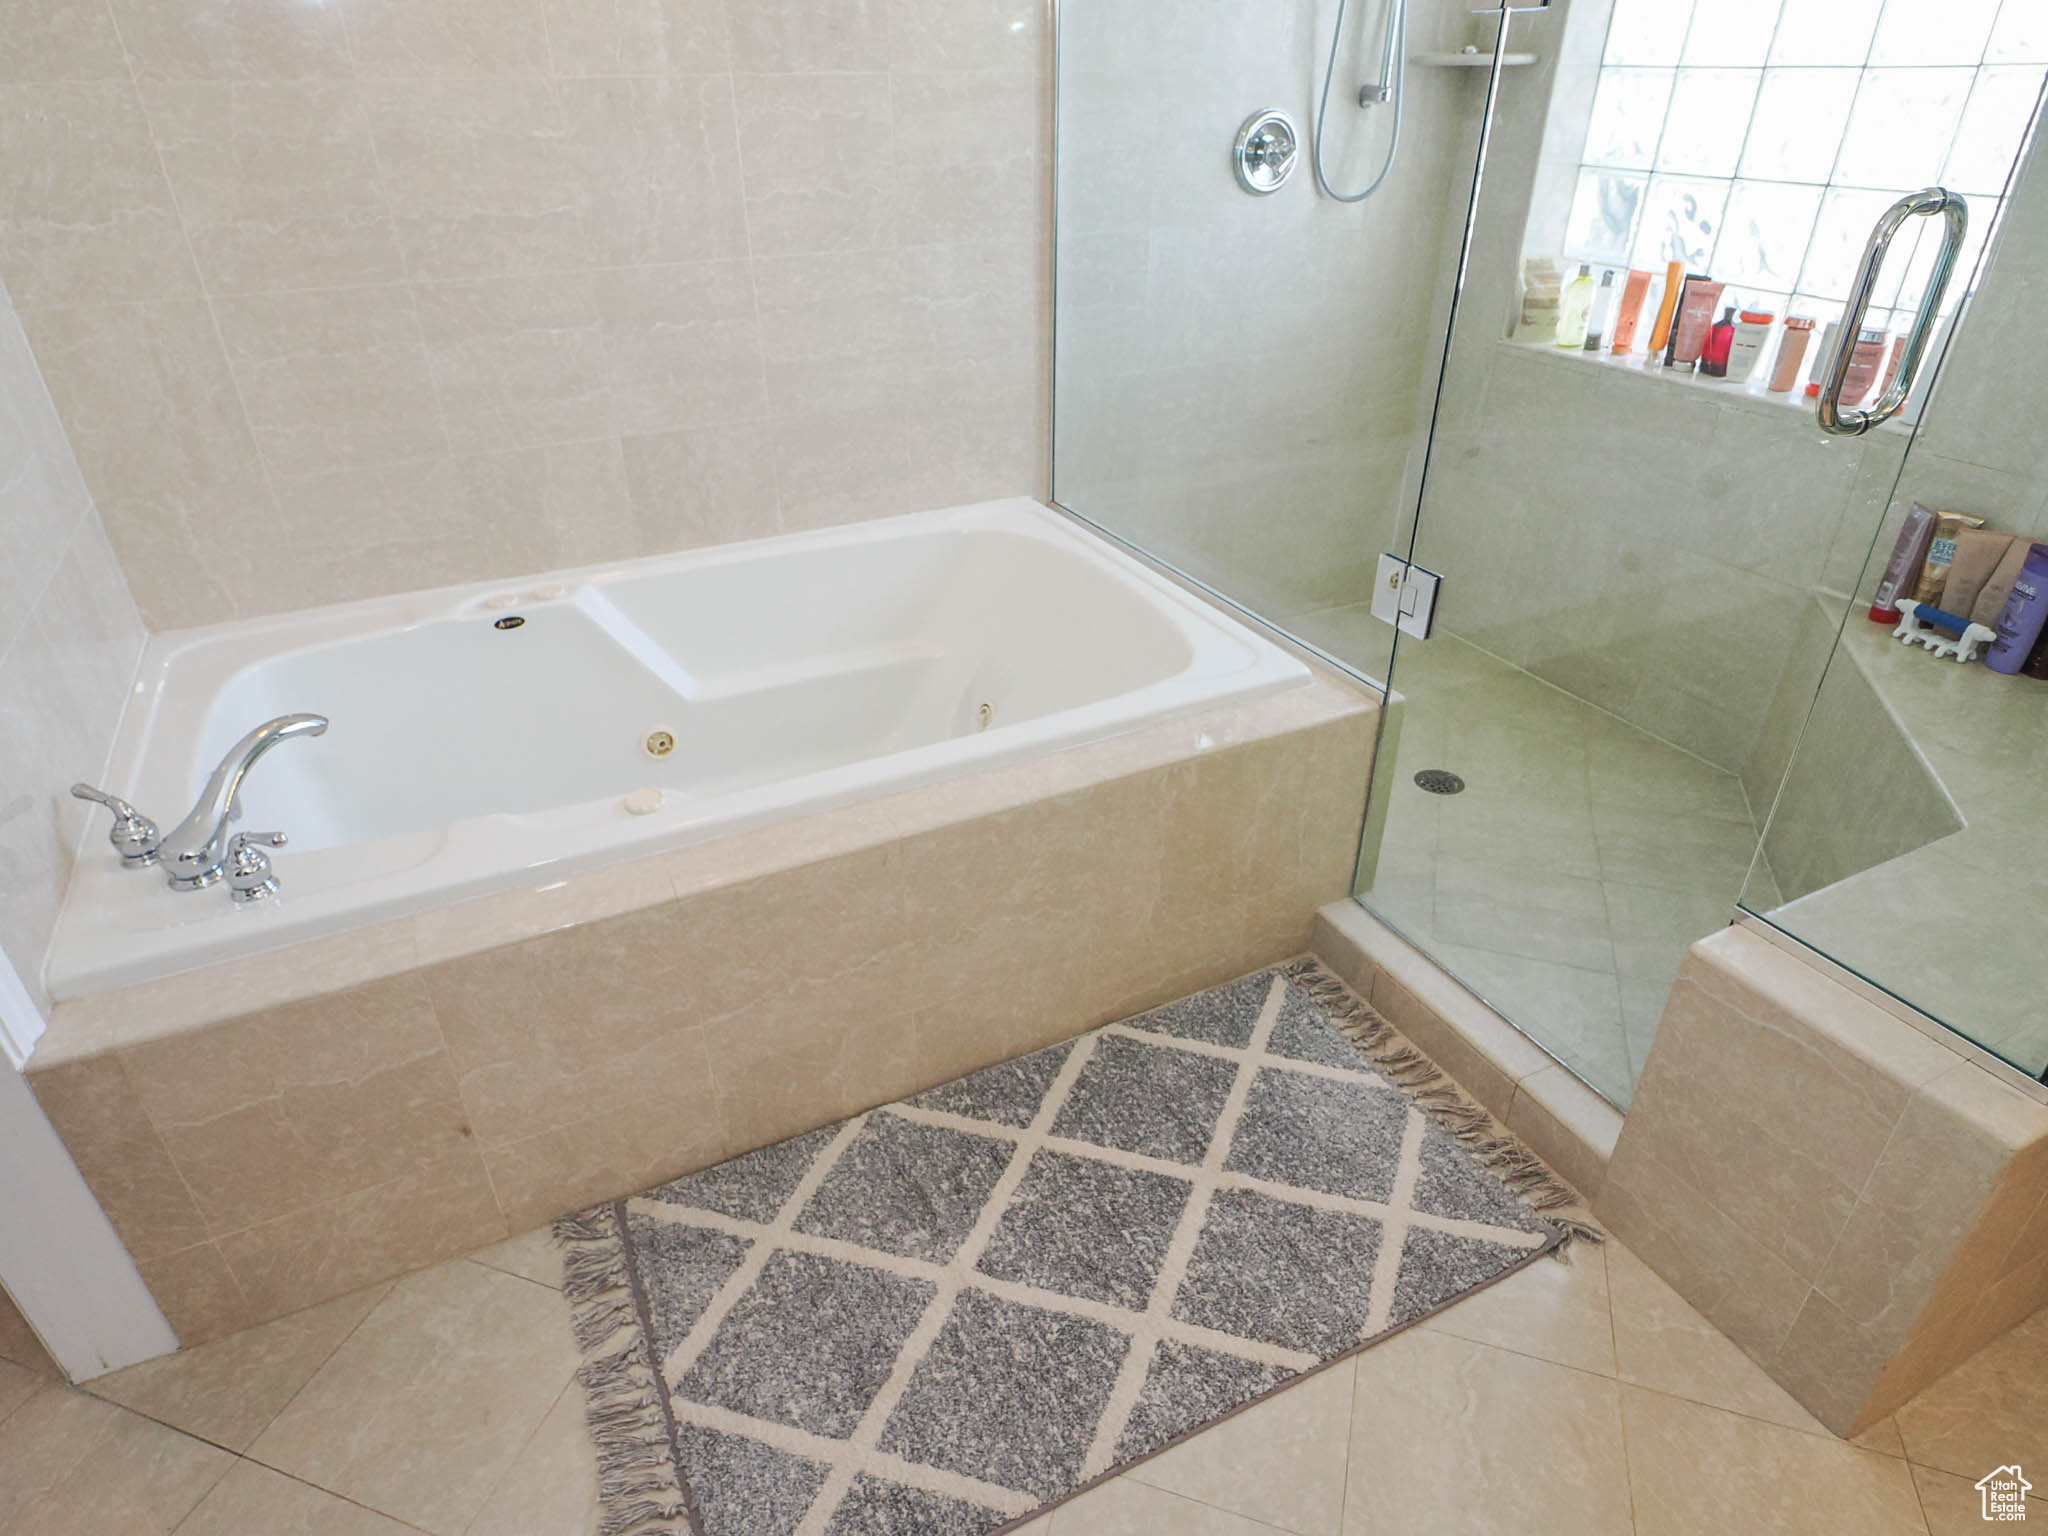 Primary Suite Bathroom with separate glass enclosed shower